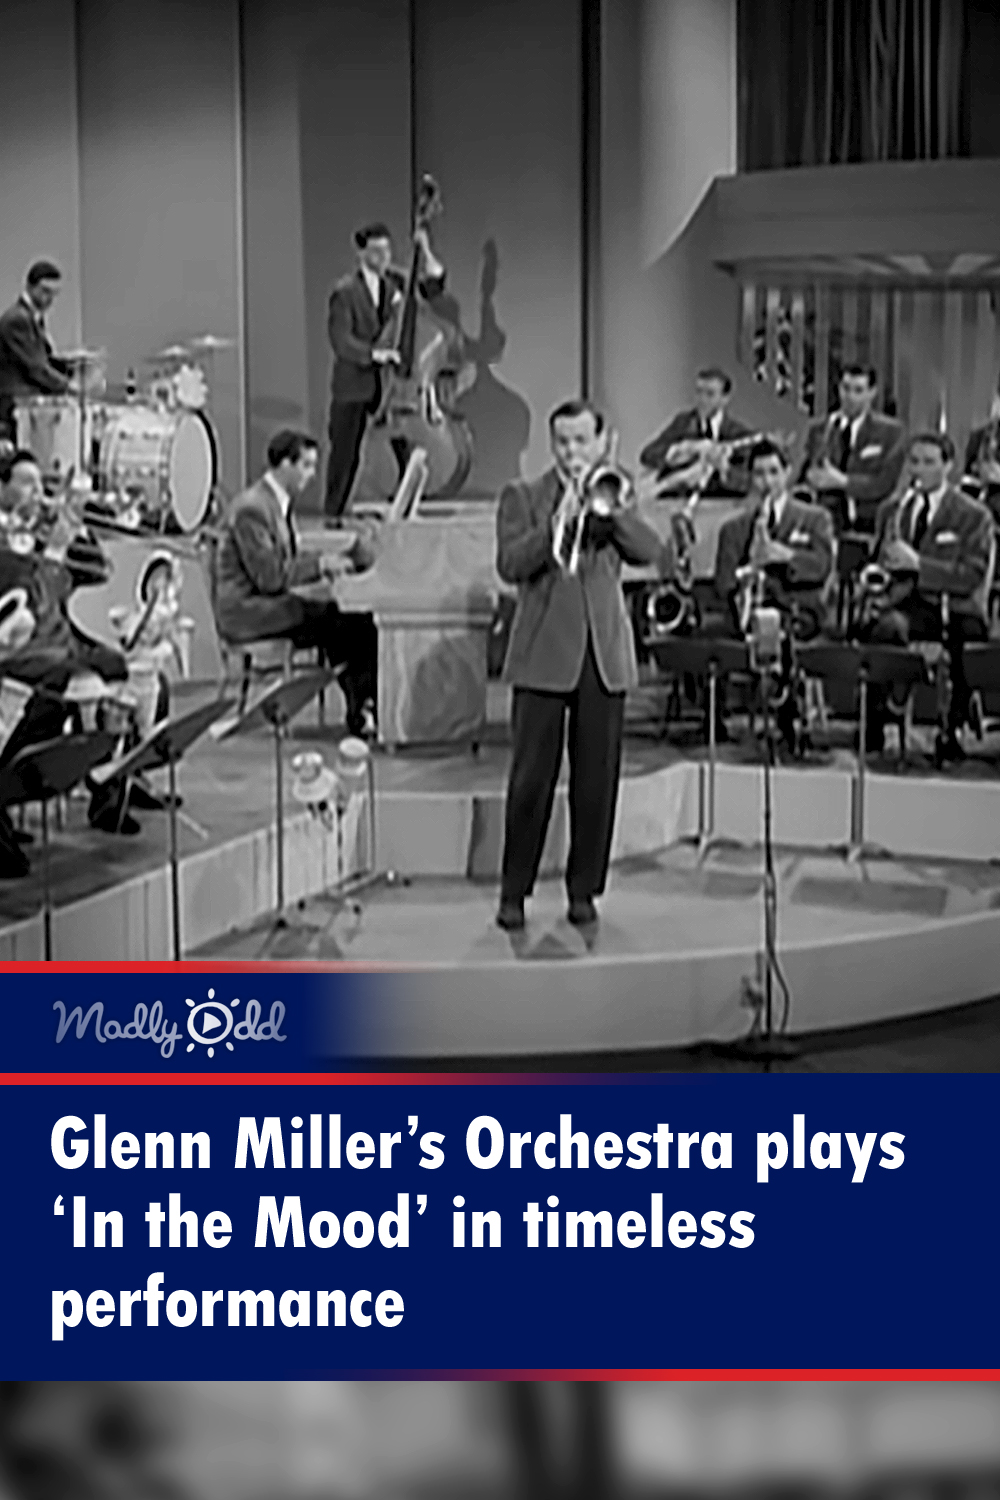 Glenn Miller’s Orchestra plays ‘In the Mood’ in timeless performance